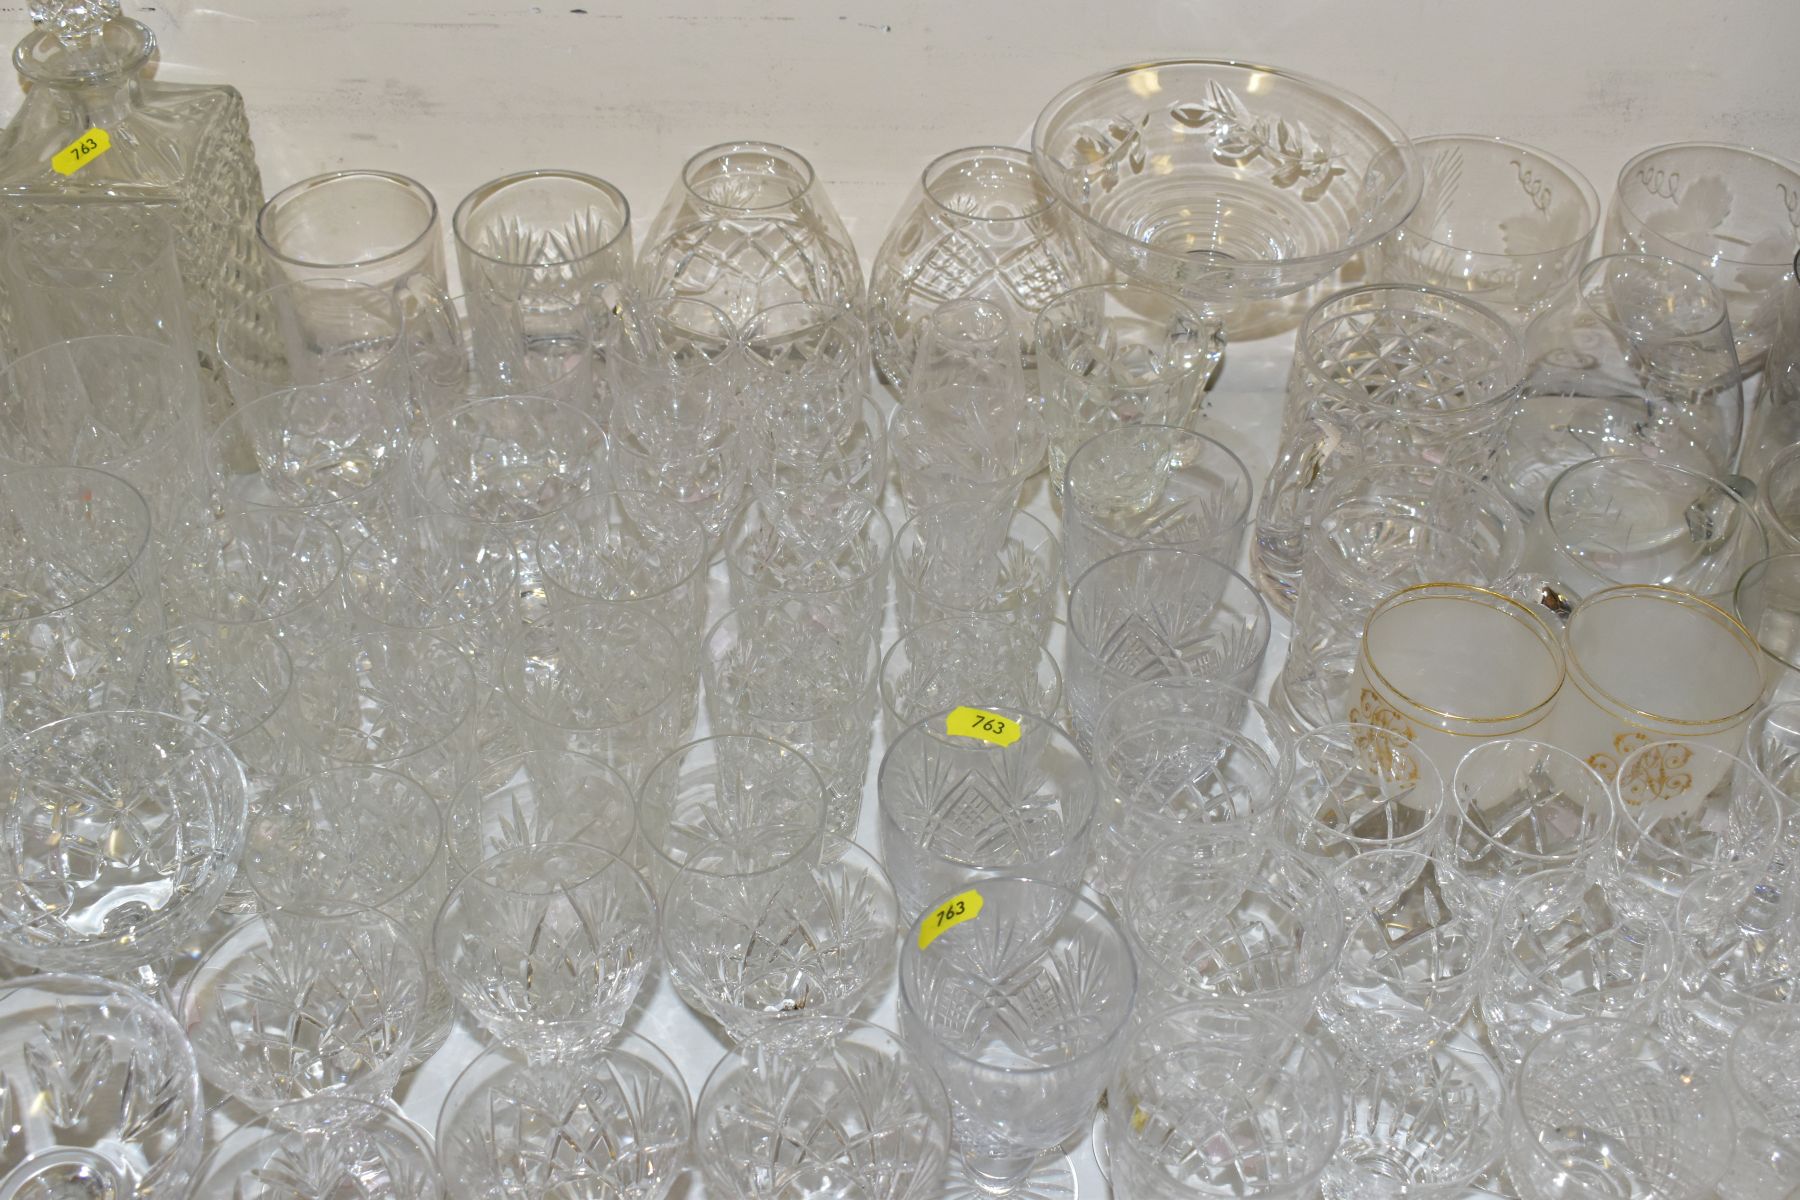 A LARGE COLLECTION OF DRINKING GLASSES, FIVE DECANTERS, A BOXED SET OF ROYAL SEFTON CRYSTAL WINE - Bild 5 aus 7